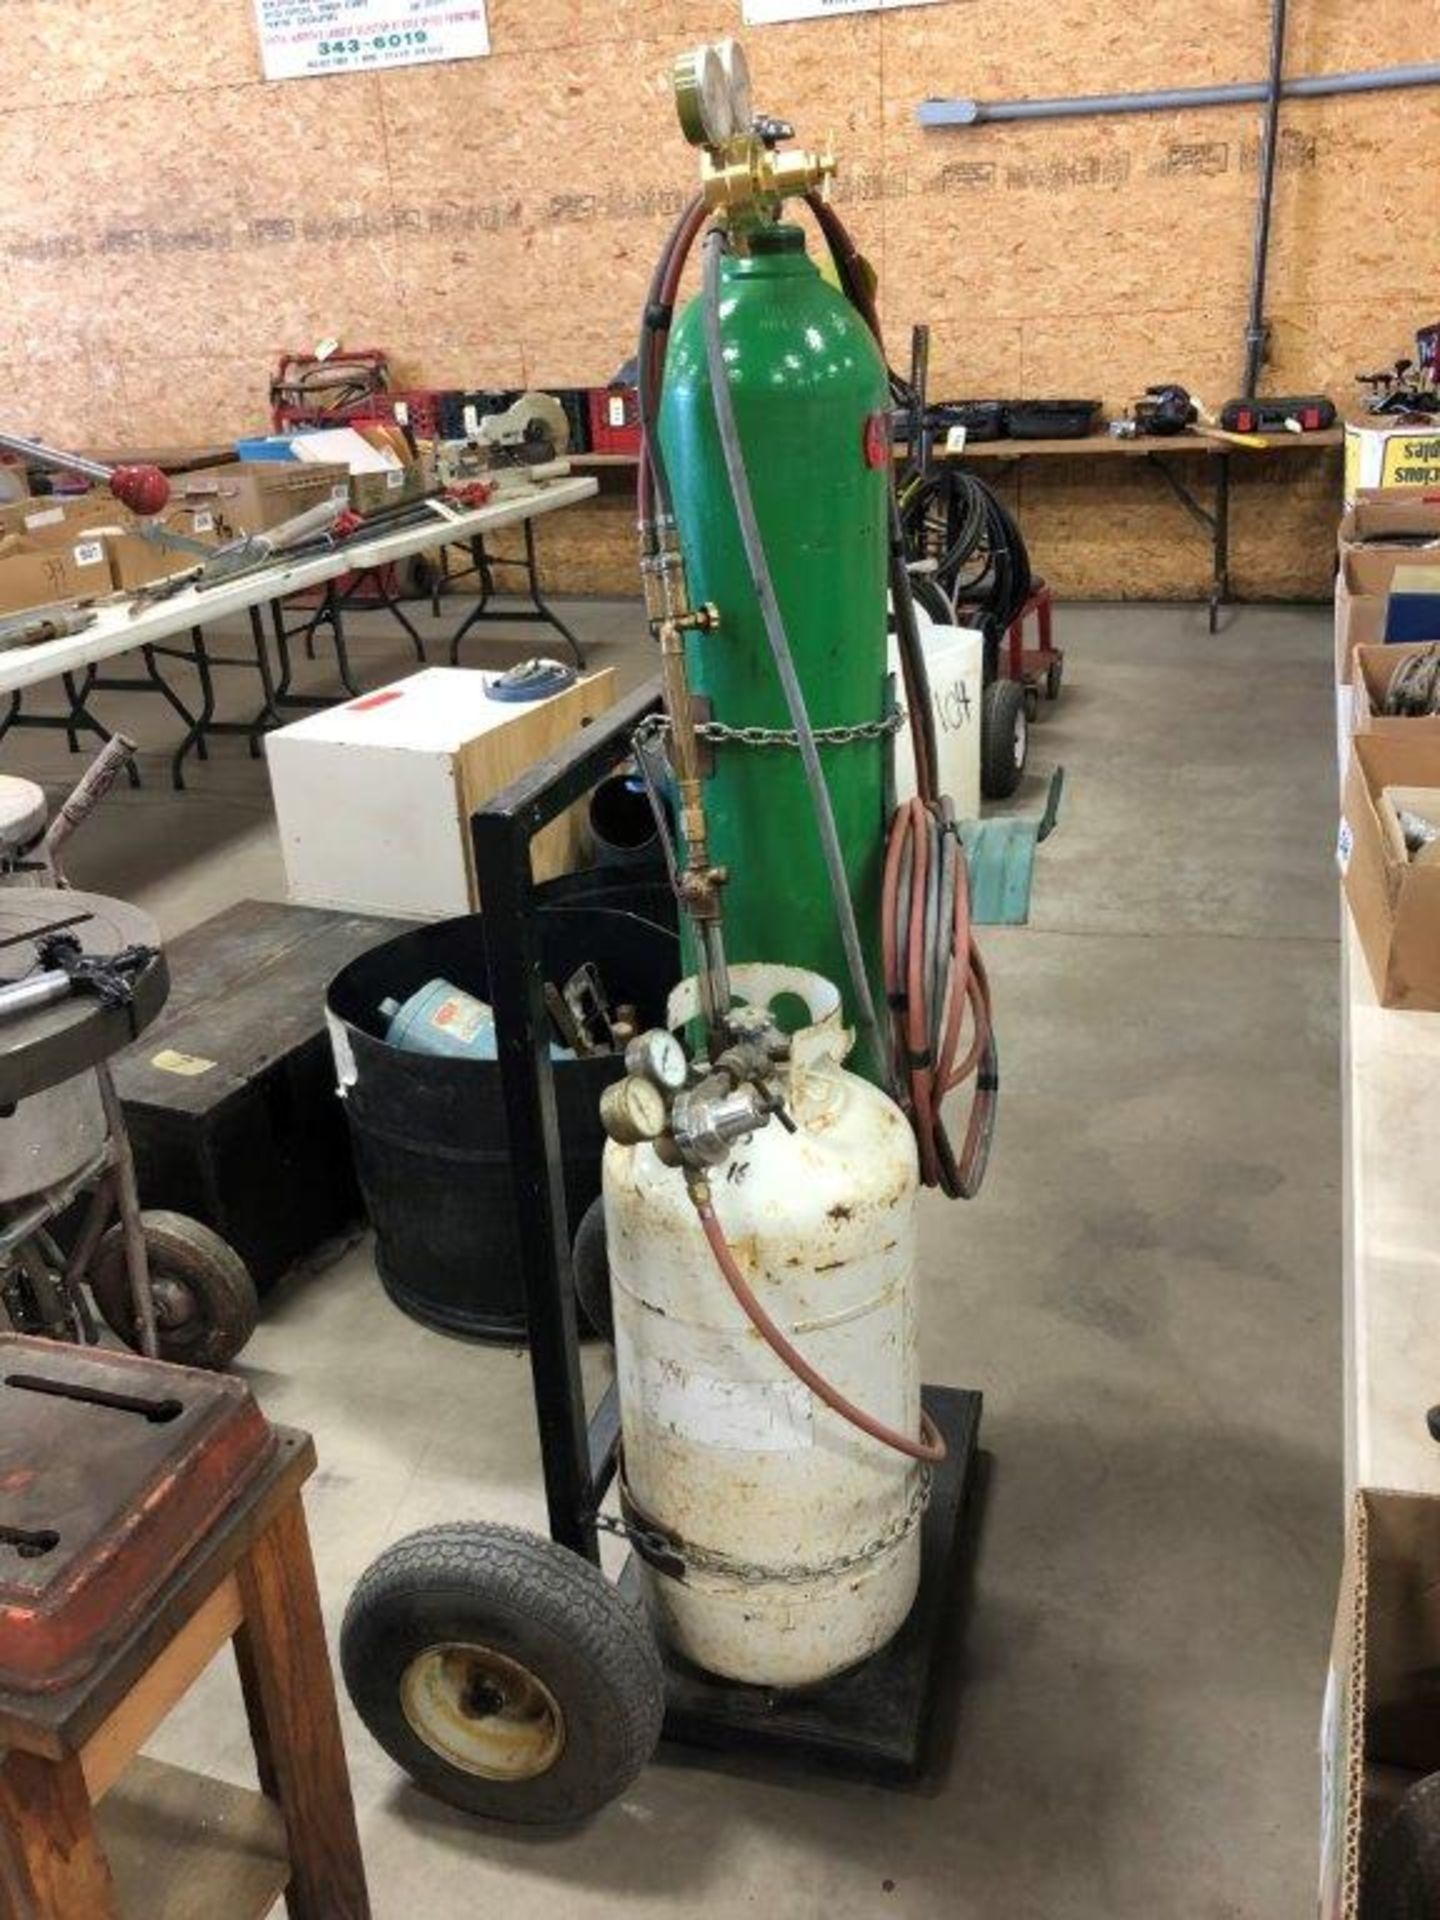 OXY/PROPANE CUTTING TORCH, TANKS, HOSES, ETC. CUSTOMER-OWNED BOTTLES - 43 - Image 2 of 4